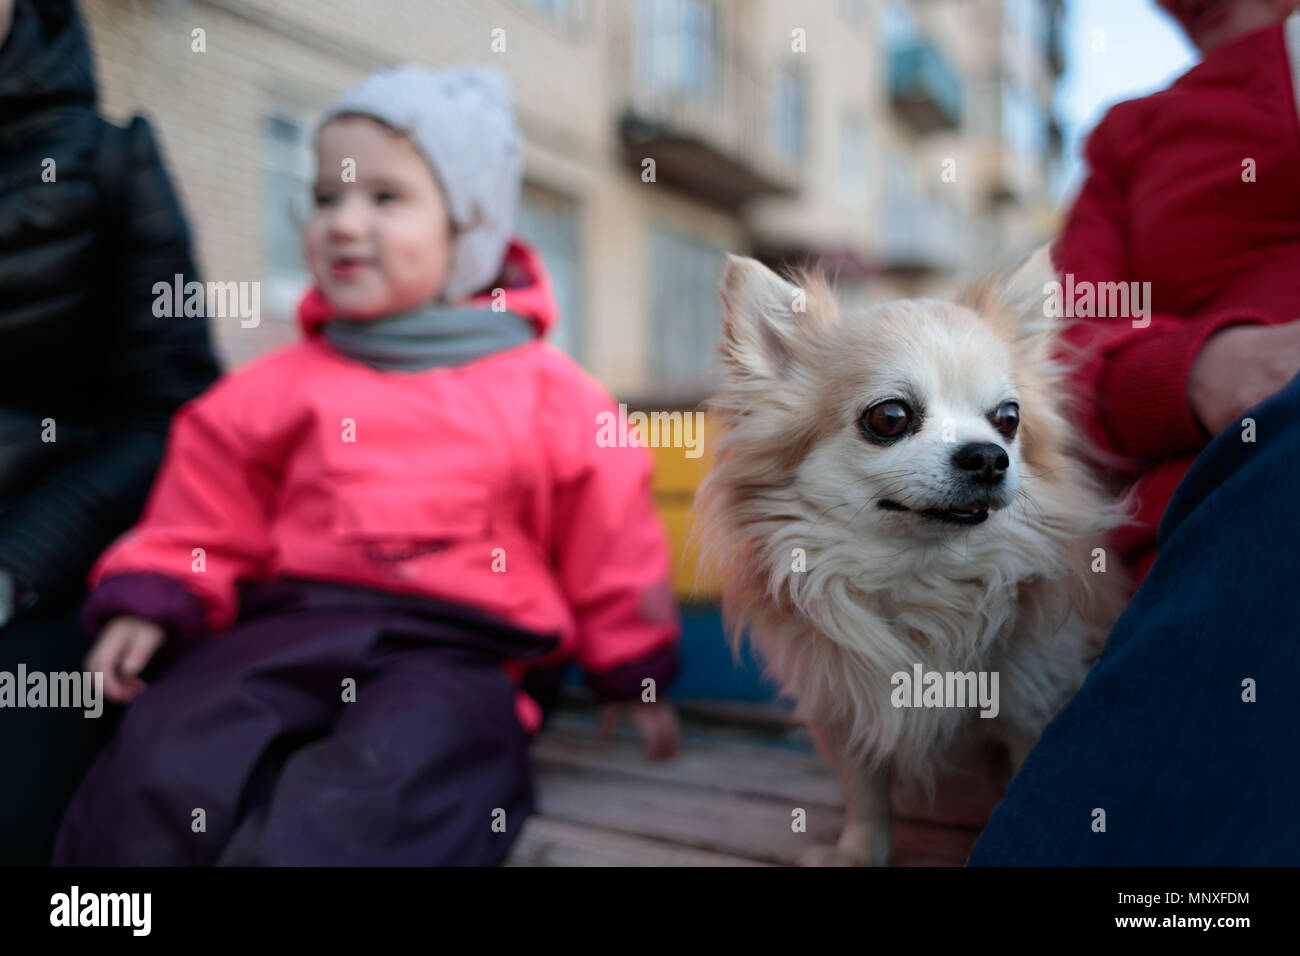 furry dog on a bench with people Stock Photo